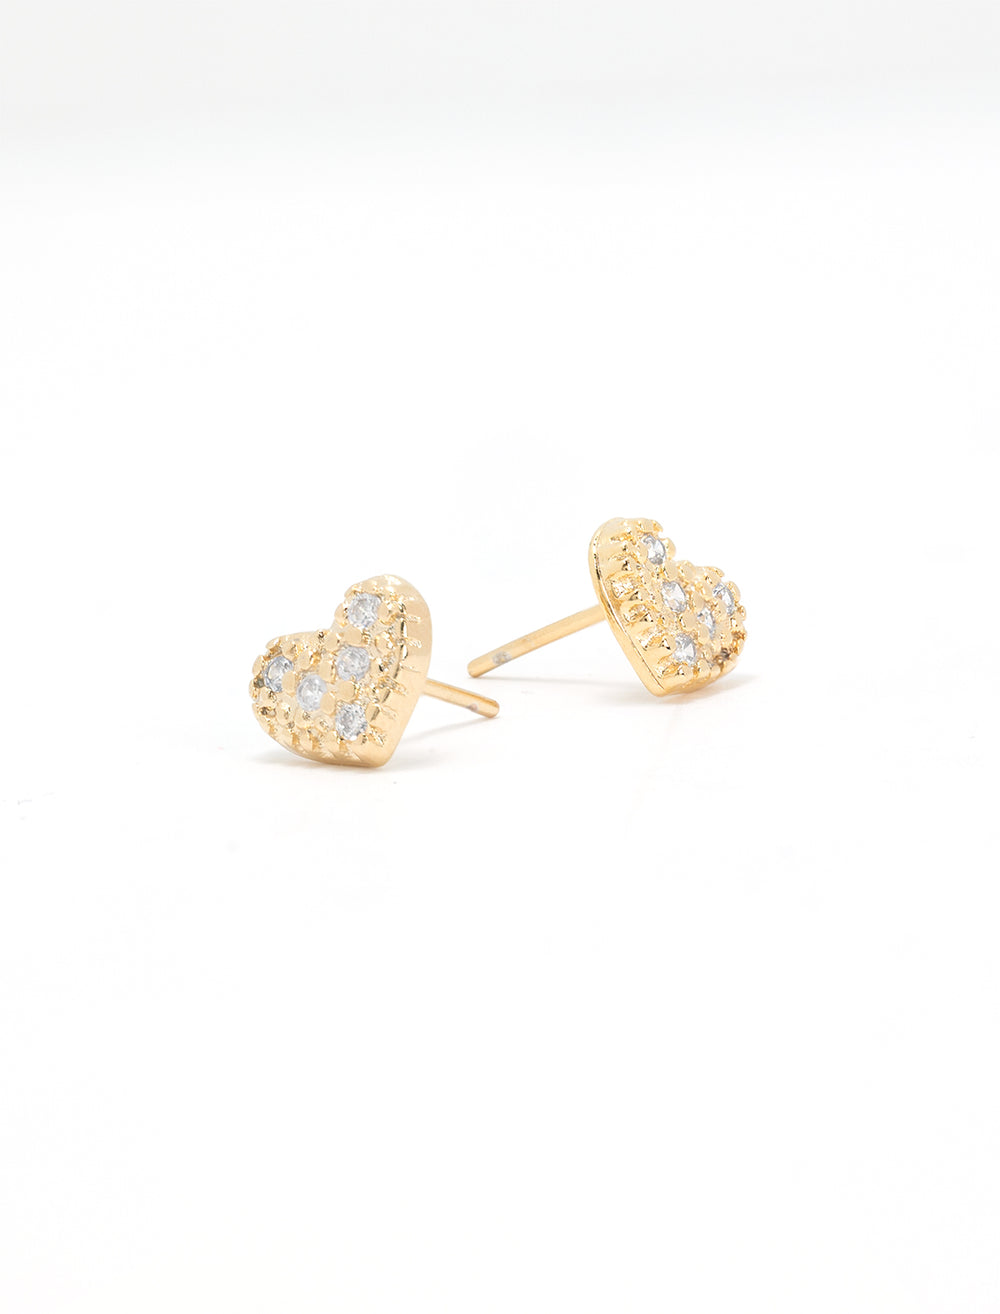 Alternative view of Jonesy Wood's gold filled pave heart studs.